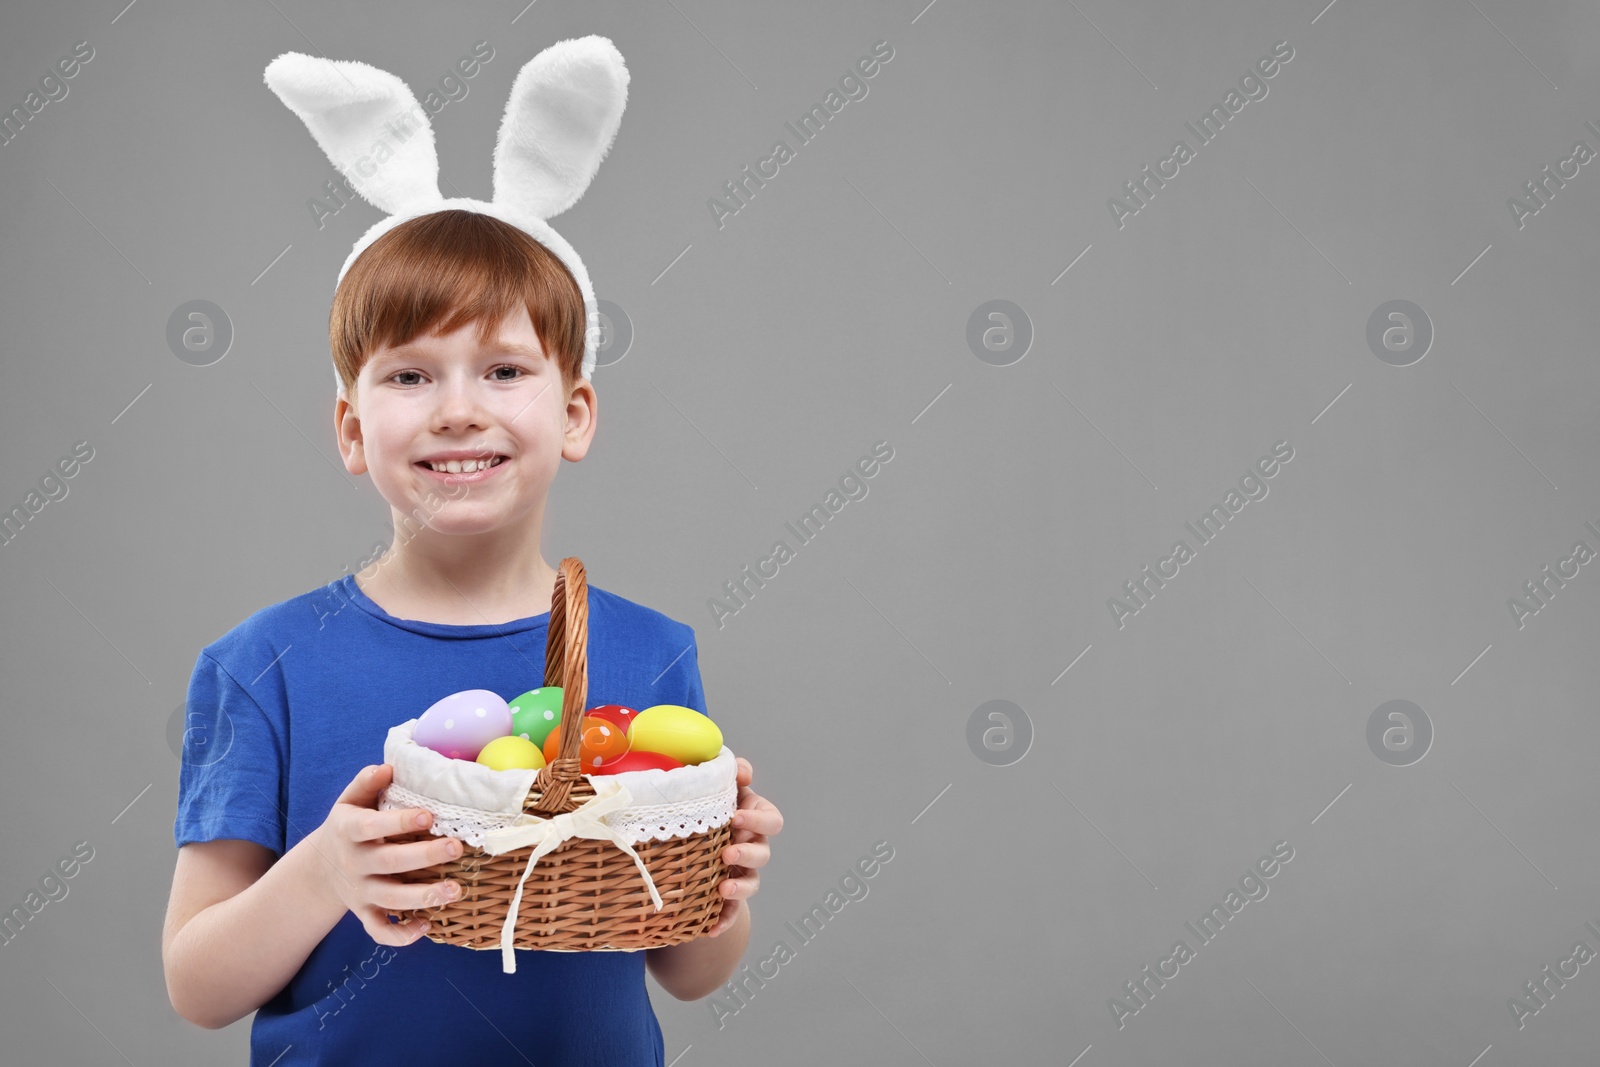 Photo of Easter celebration. Cute little boy with bunny ears and wicker basket full of painted eggs on grey background. Space for text